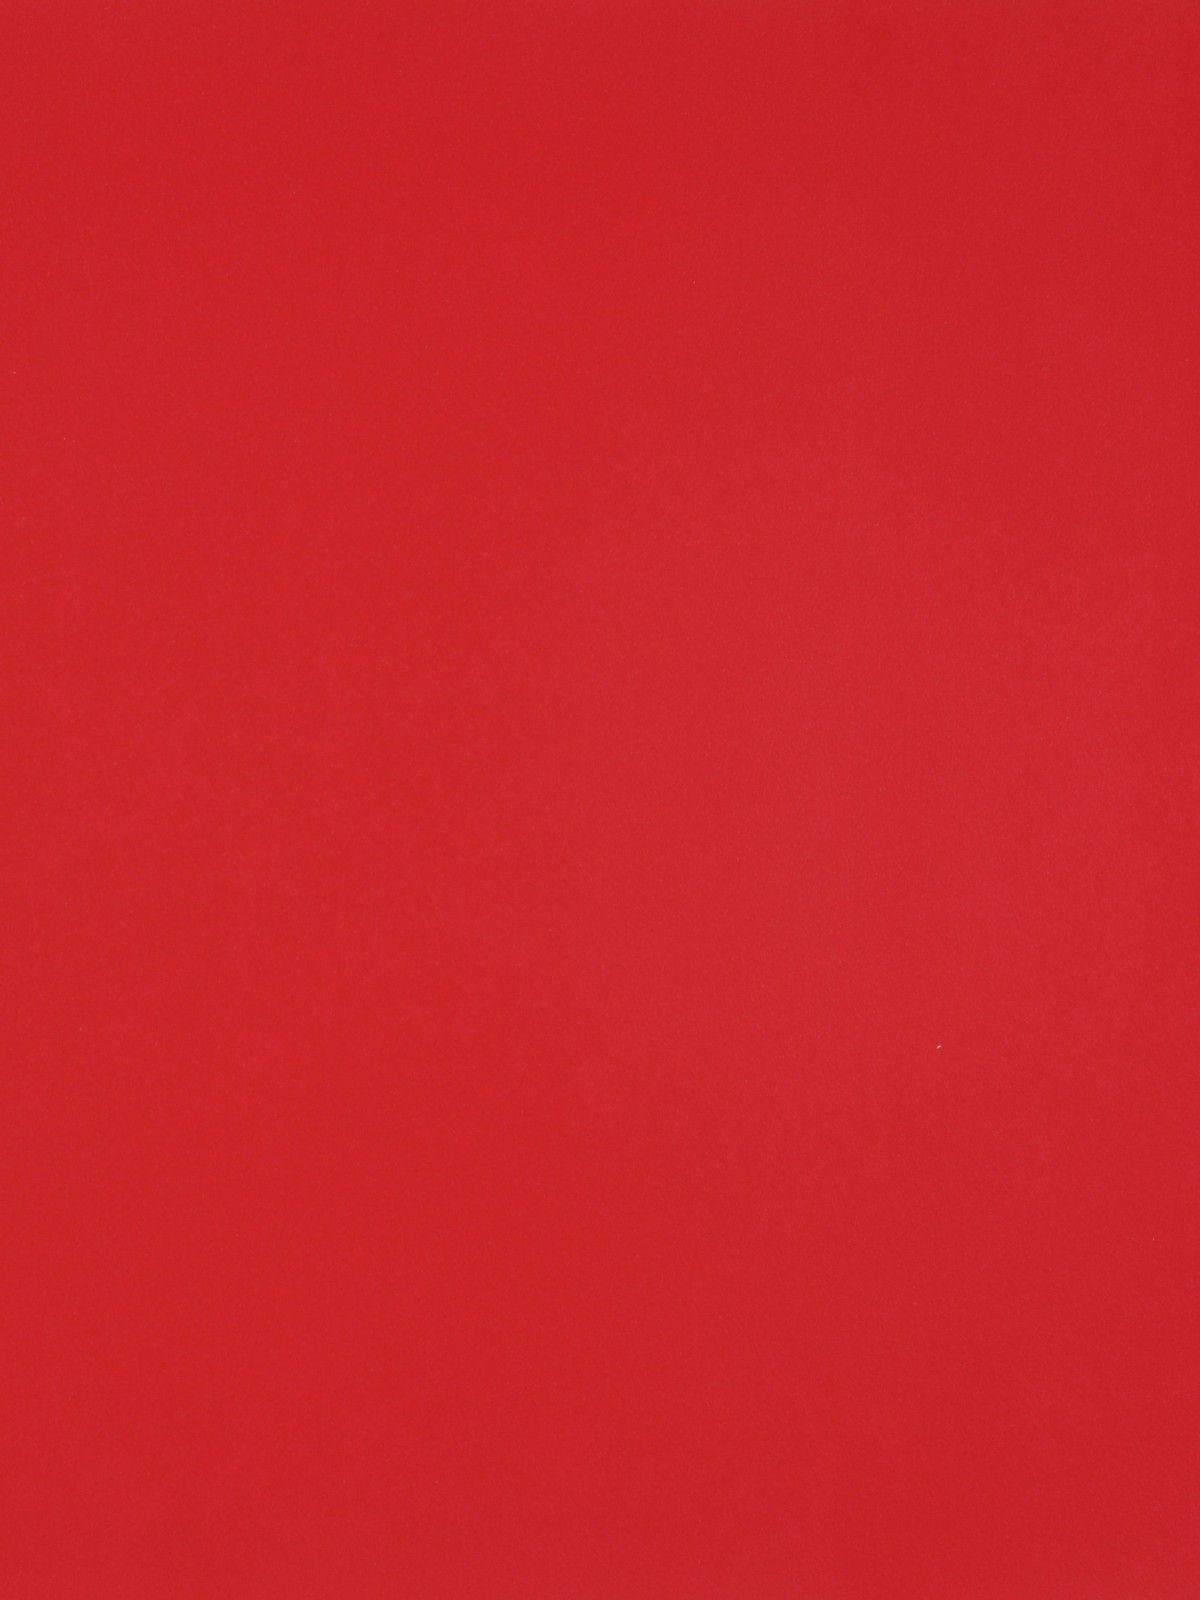 Wallpaper single one colour red solid color plain light red fac2b5